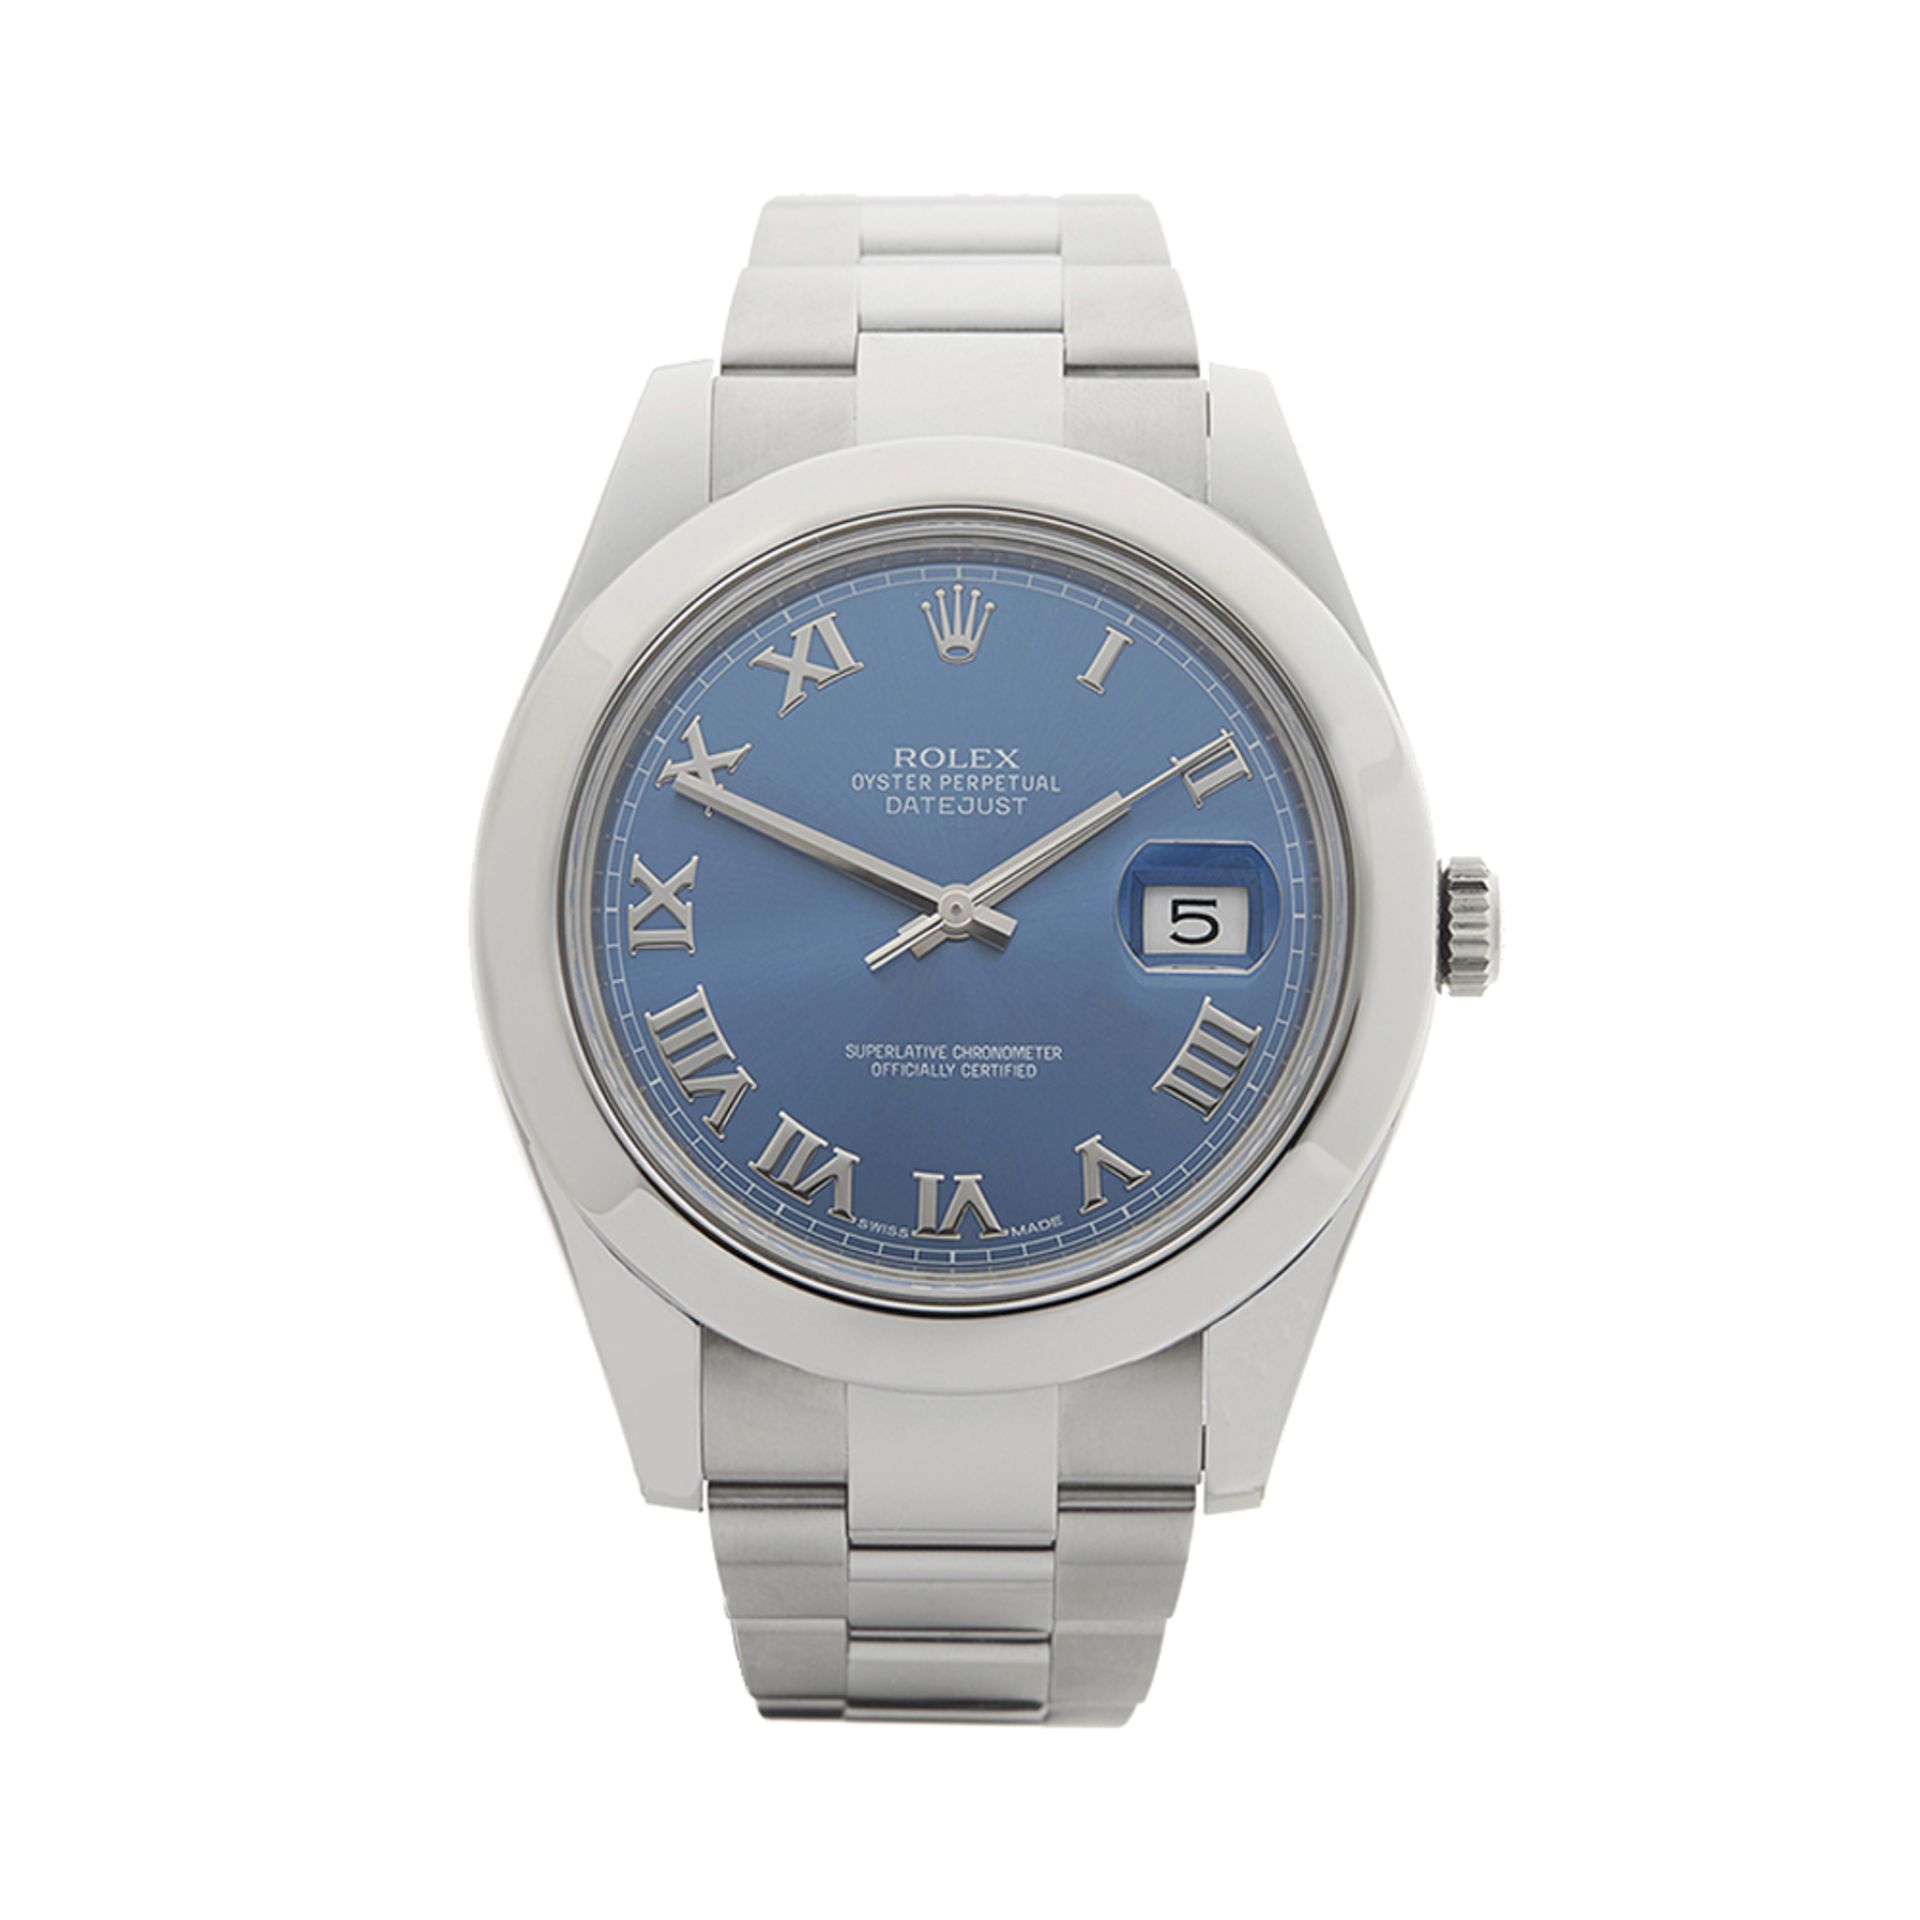 Rolex Datejust II 41mm Stainless Steel - 116300 - Image 2 of 9